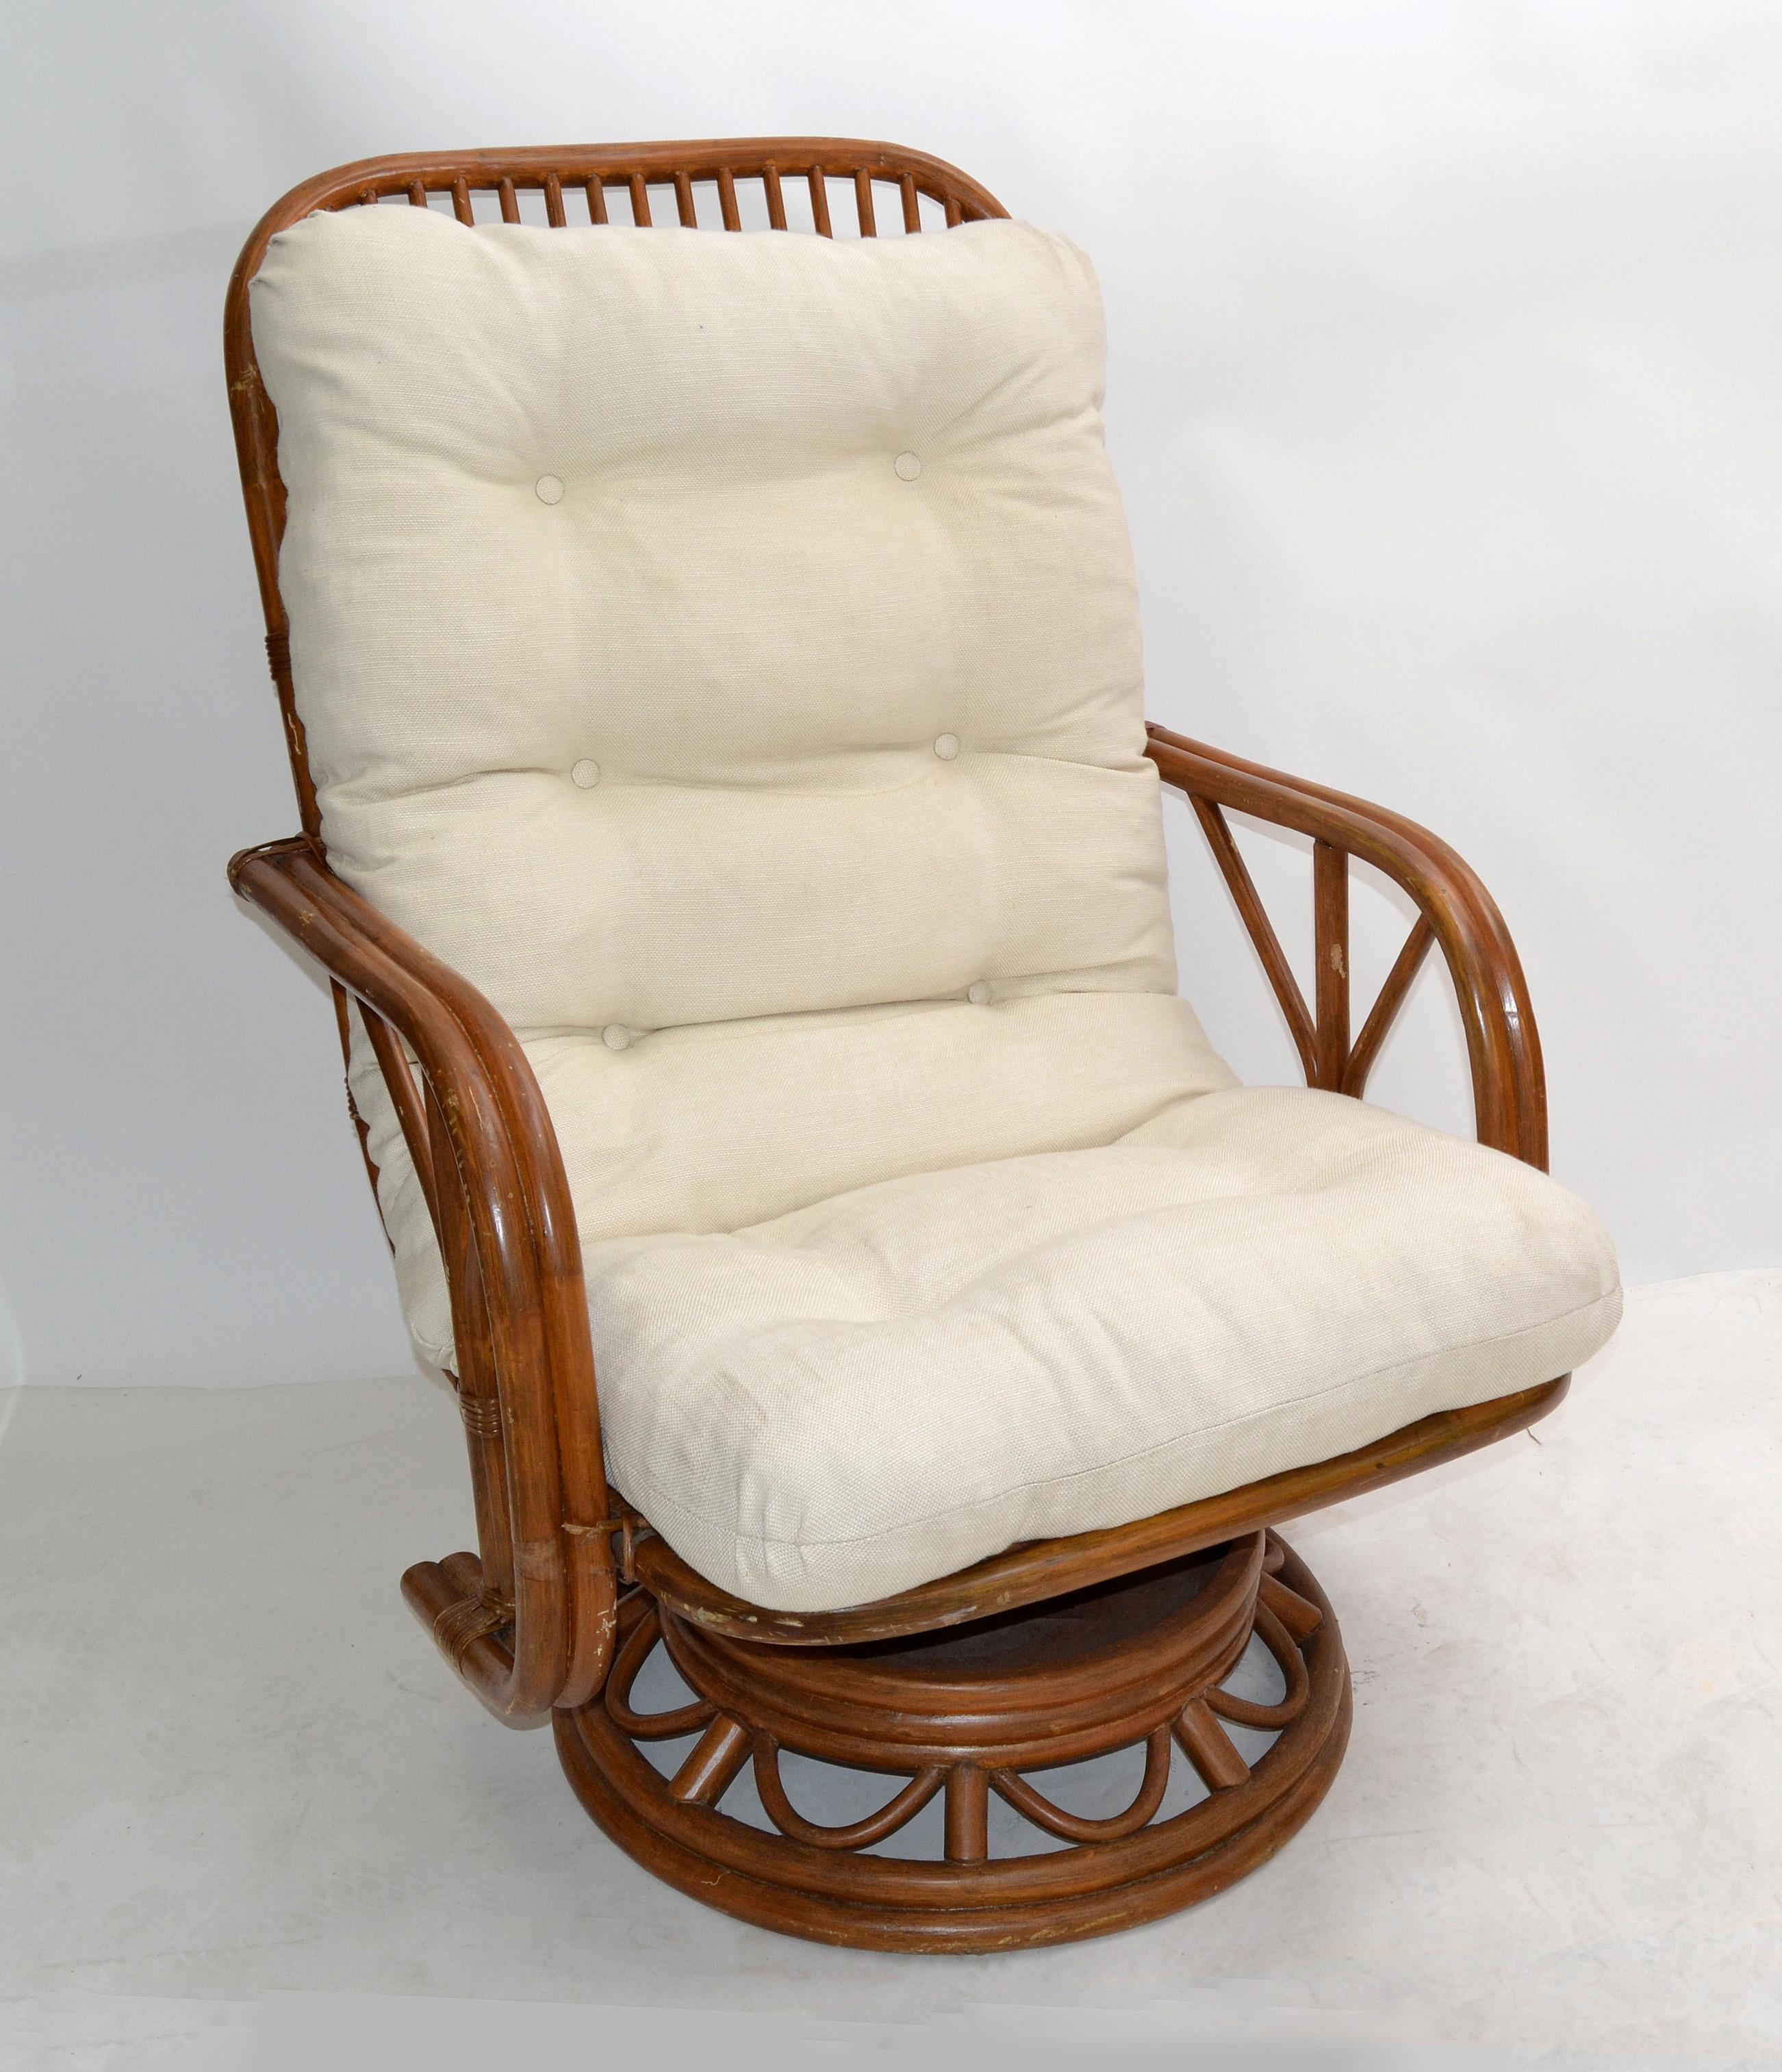 bamboo chairs vintage